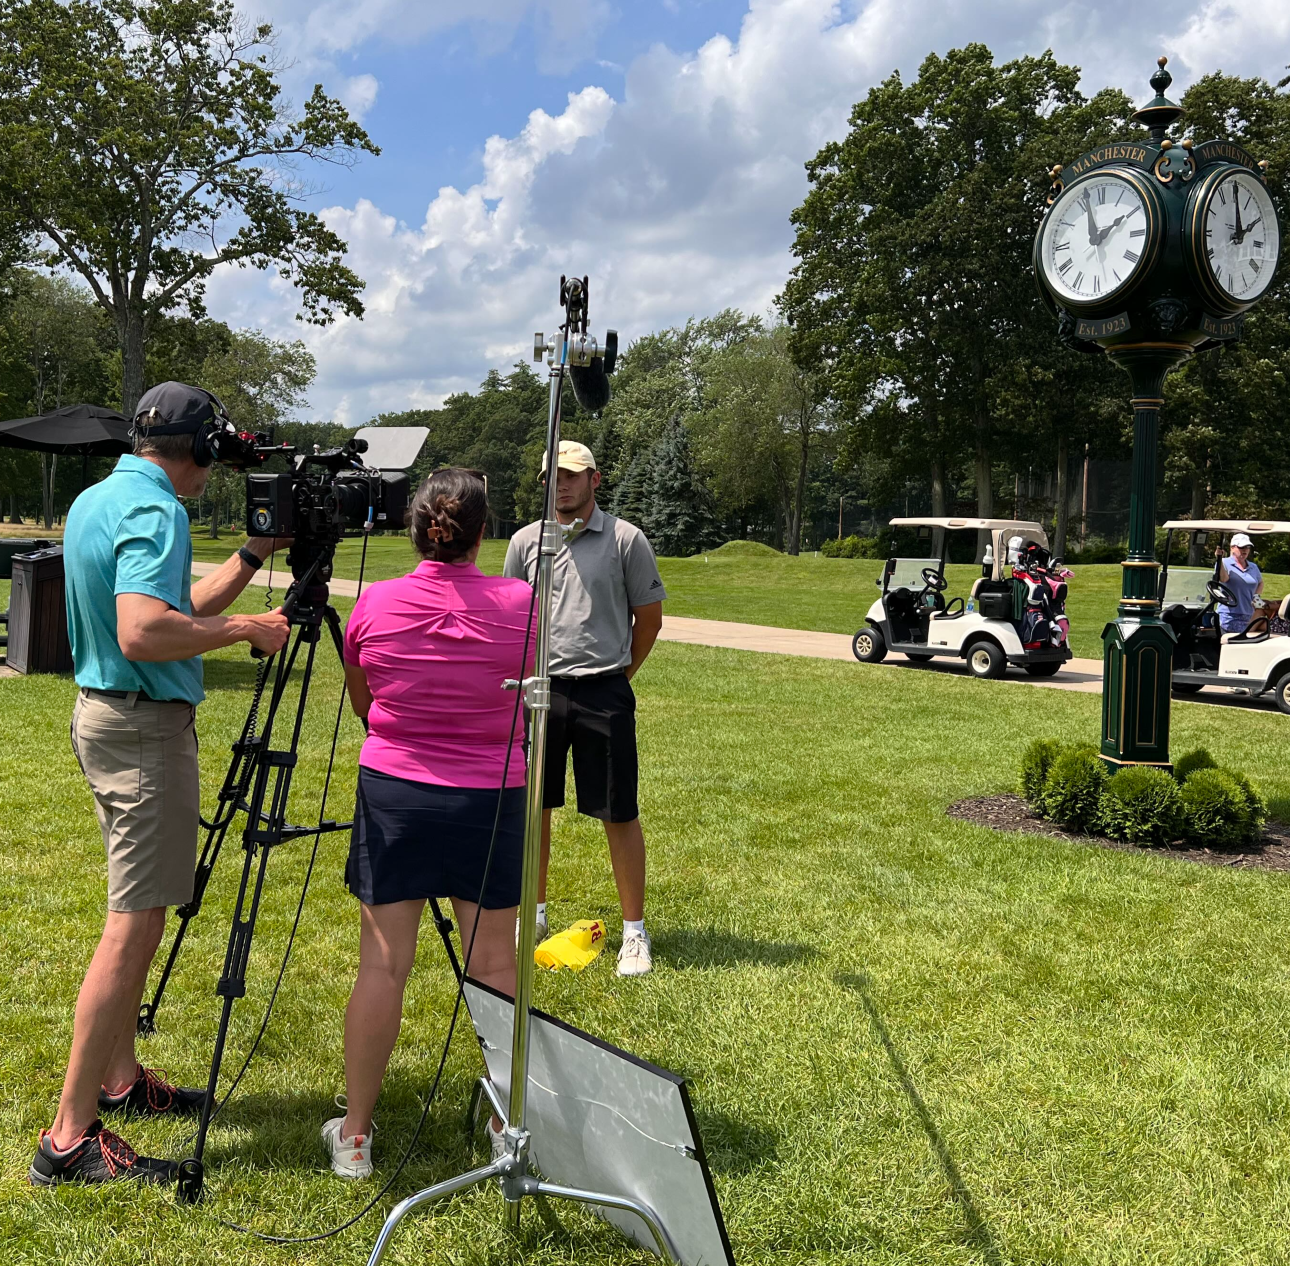 Granite River Studios crew on set of a film shooting location interviewing a golfer with golfs carts behind him.